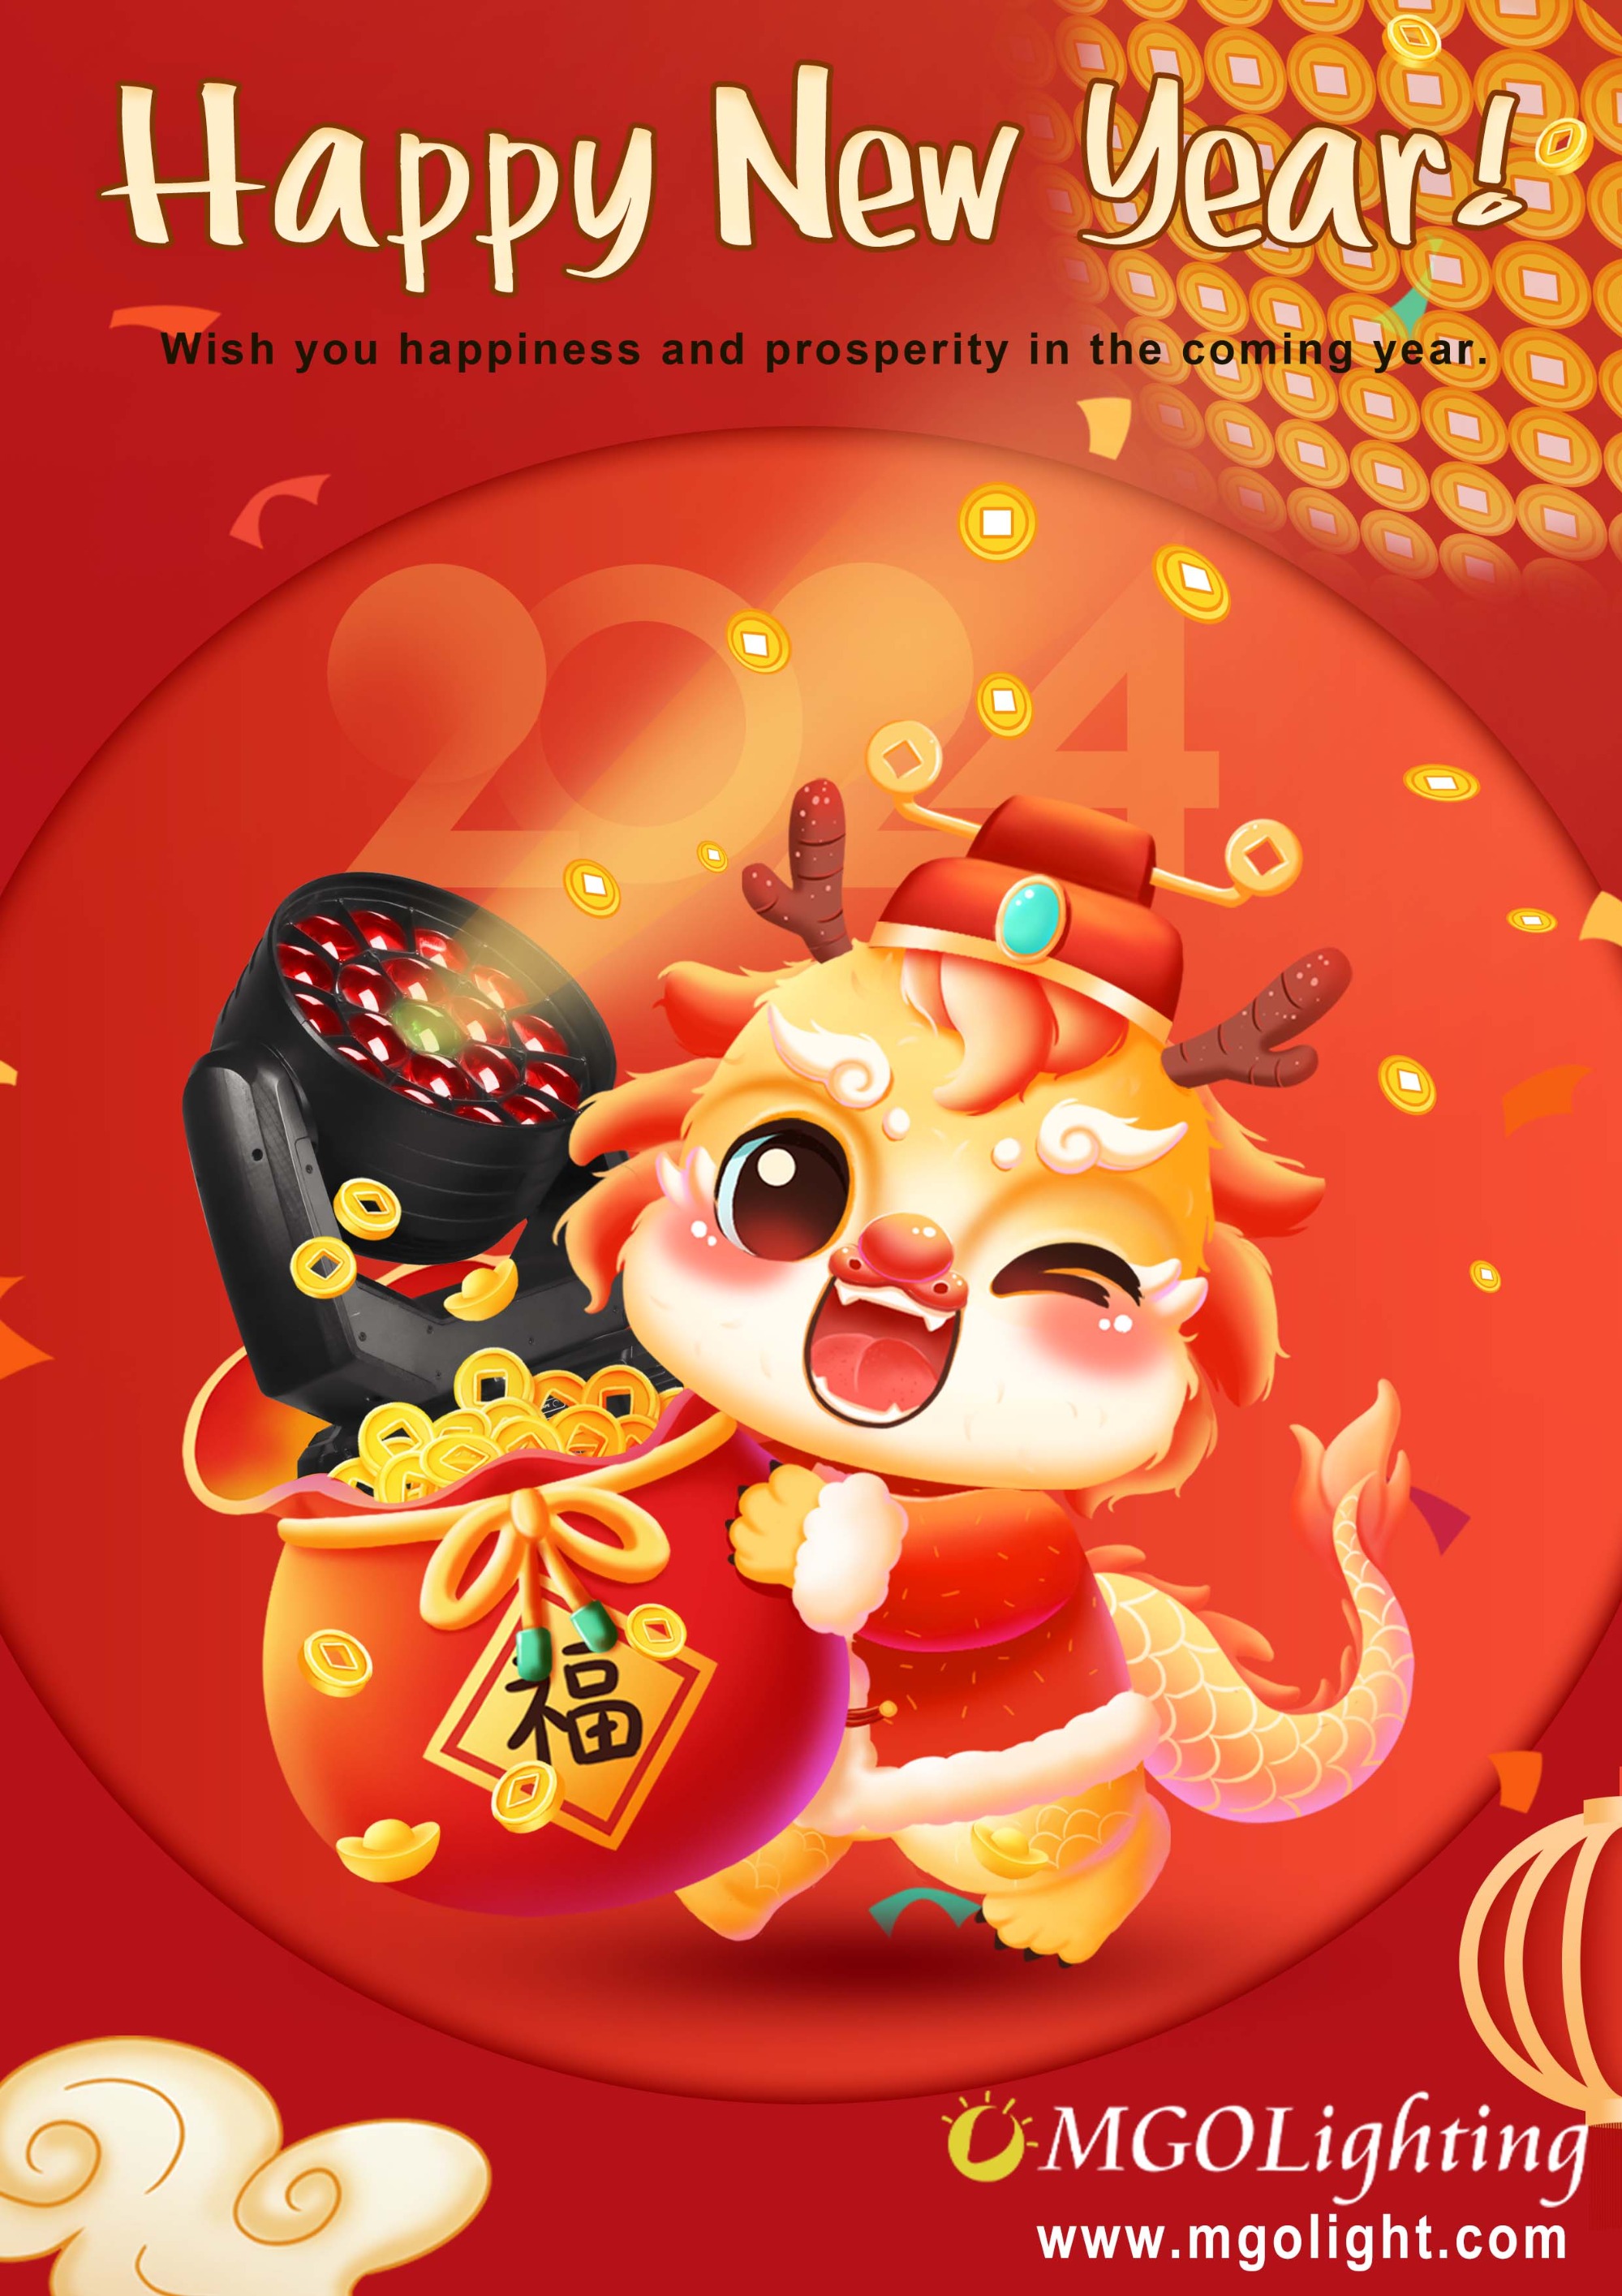 We wish you a happy Chinese New Year!